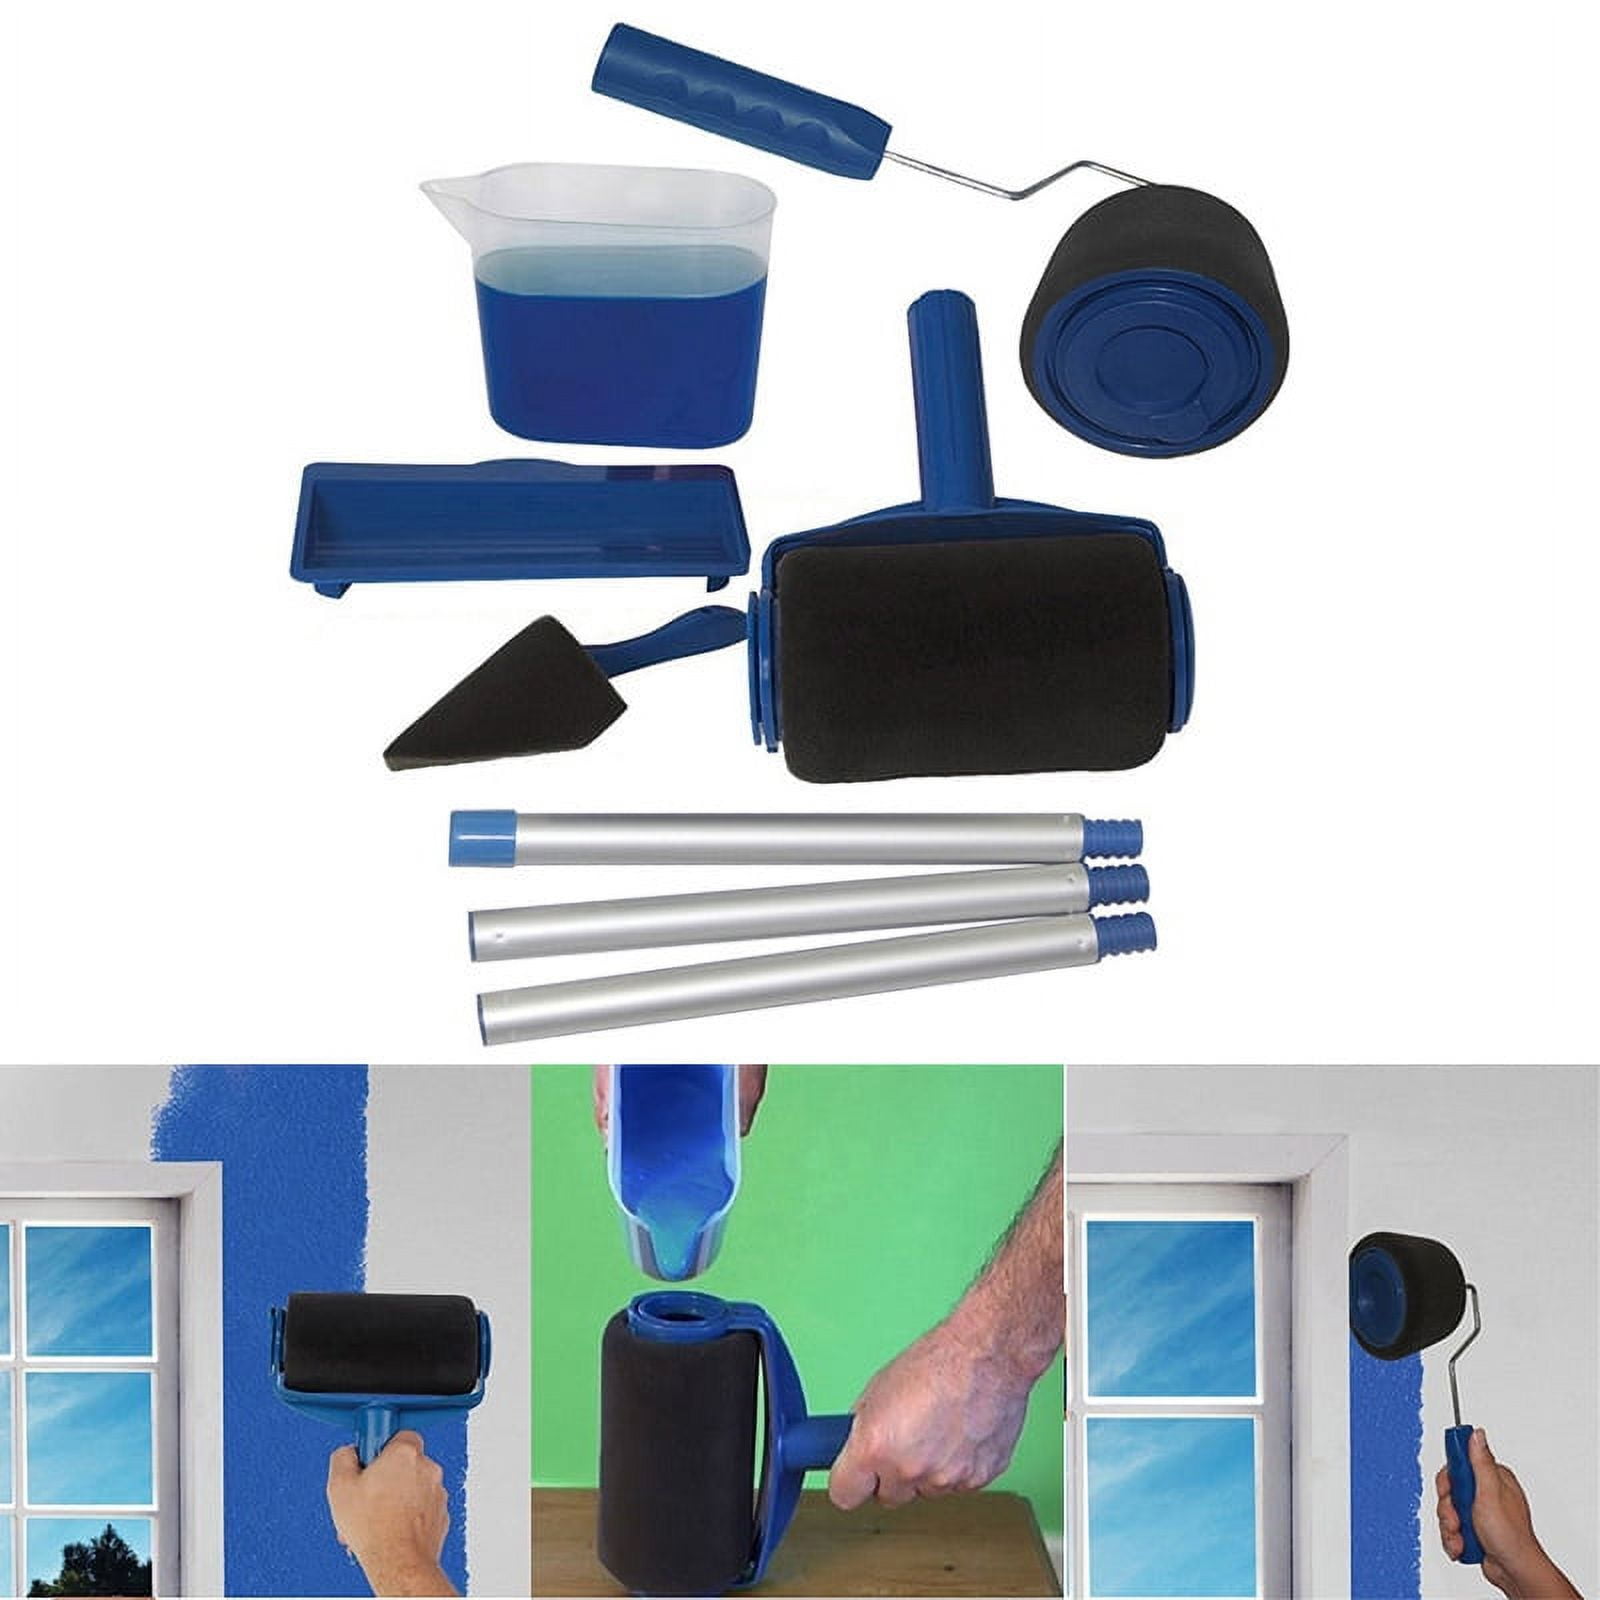  Paint Roller Kit - Paint Roller Brush Set Paint Supplies for Home  Improvement, No Prep, No Mess, Painting in Just Minutes (12 Pcs) : Tools & Home  Improvement